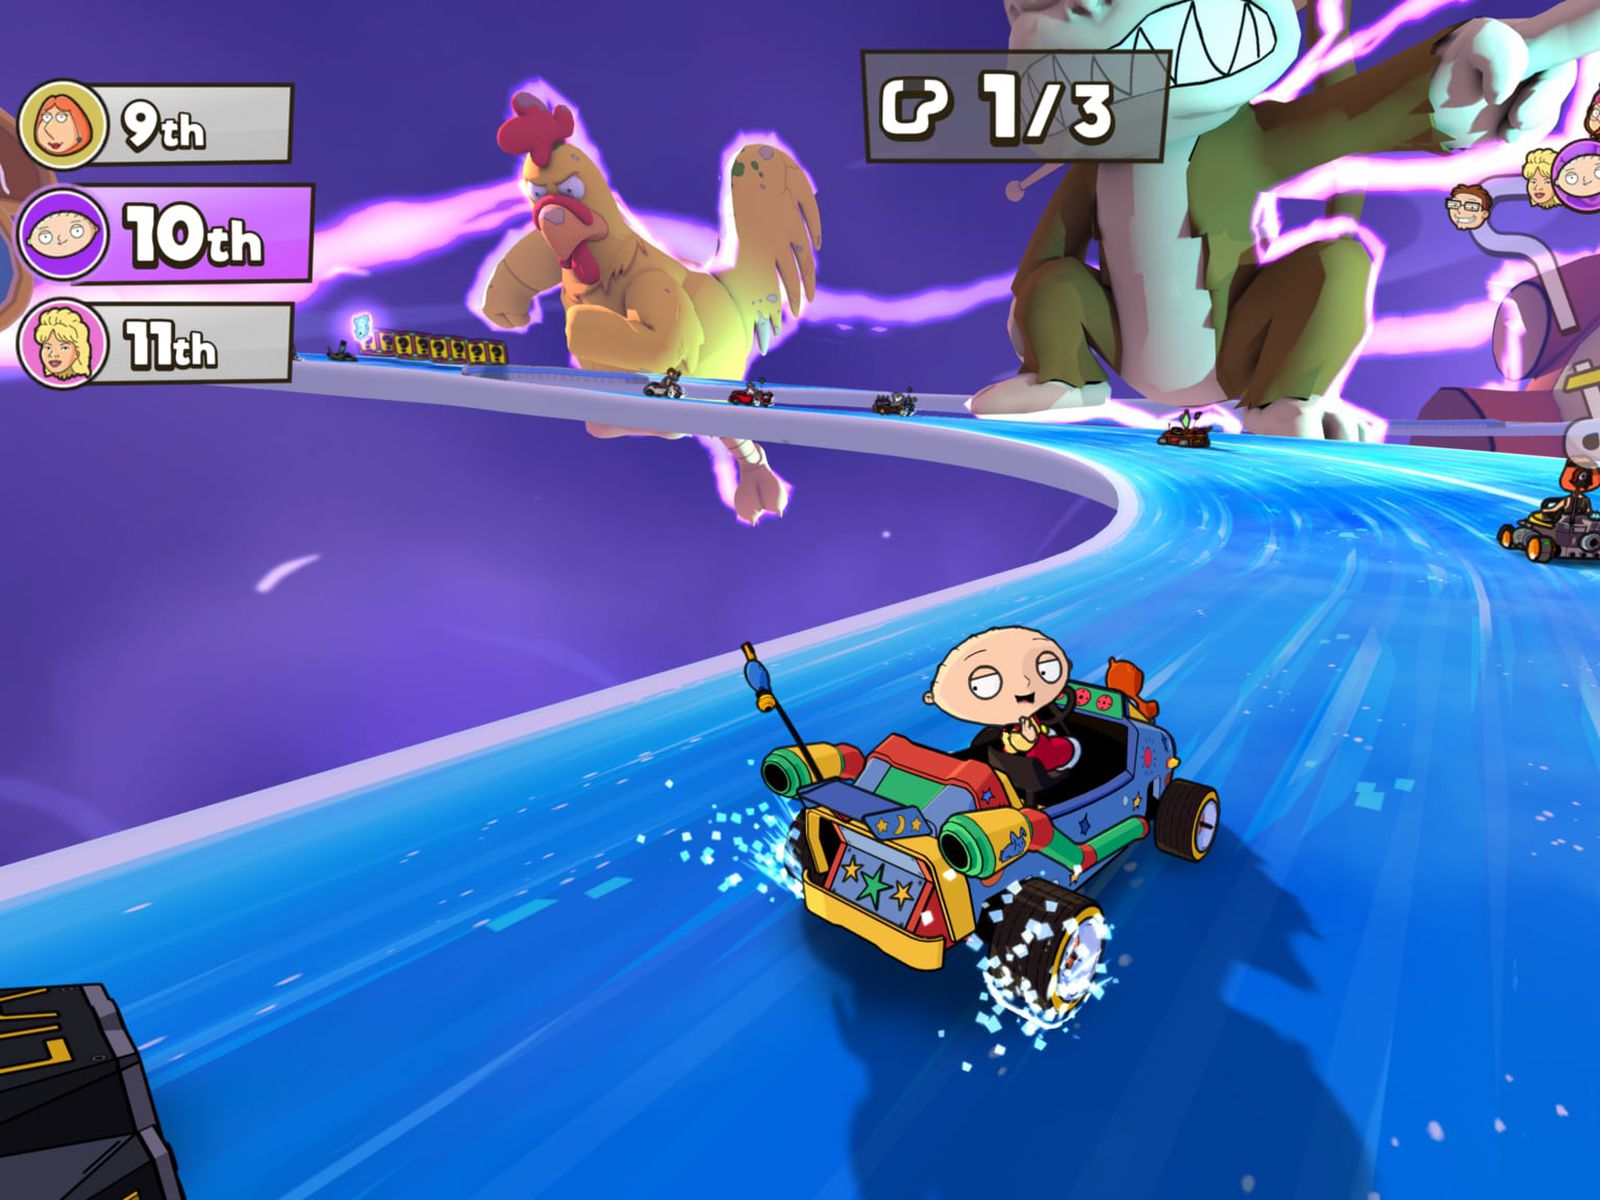 Apple Arcade Gains New Warped Kart Racers Game Featuring Characters From  'Family Guy' and 'King of the Hill' - MacRumors